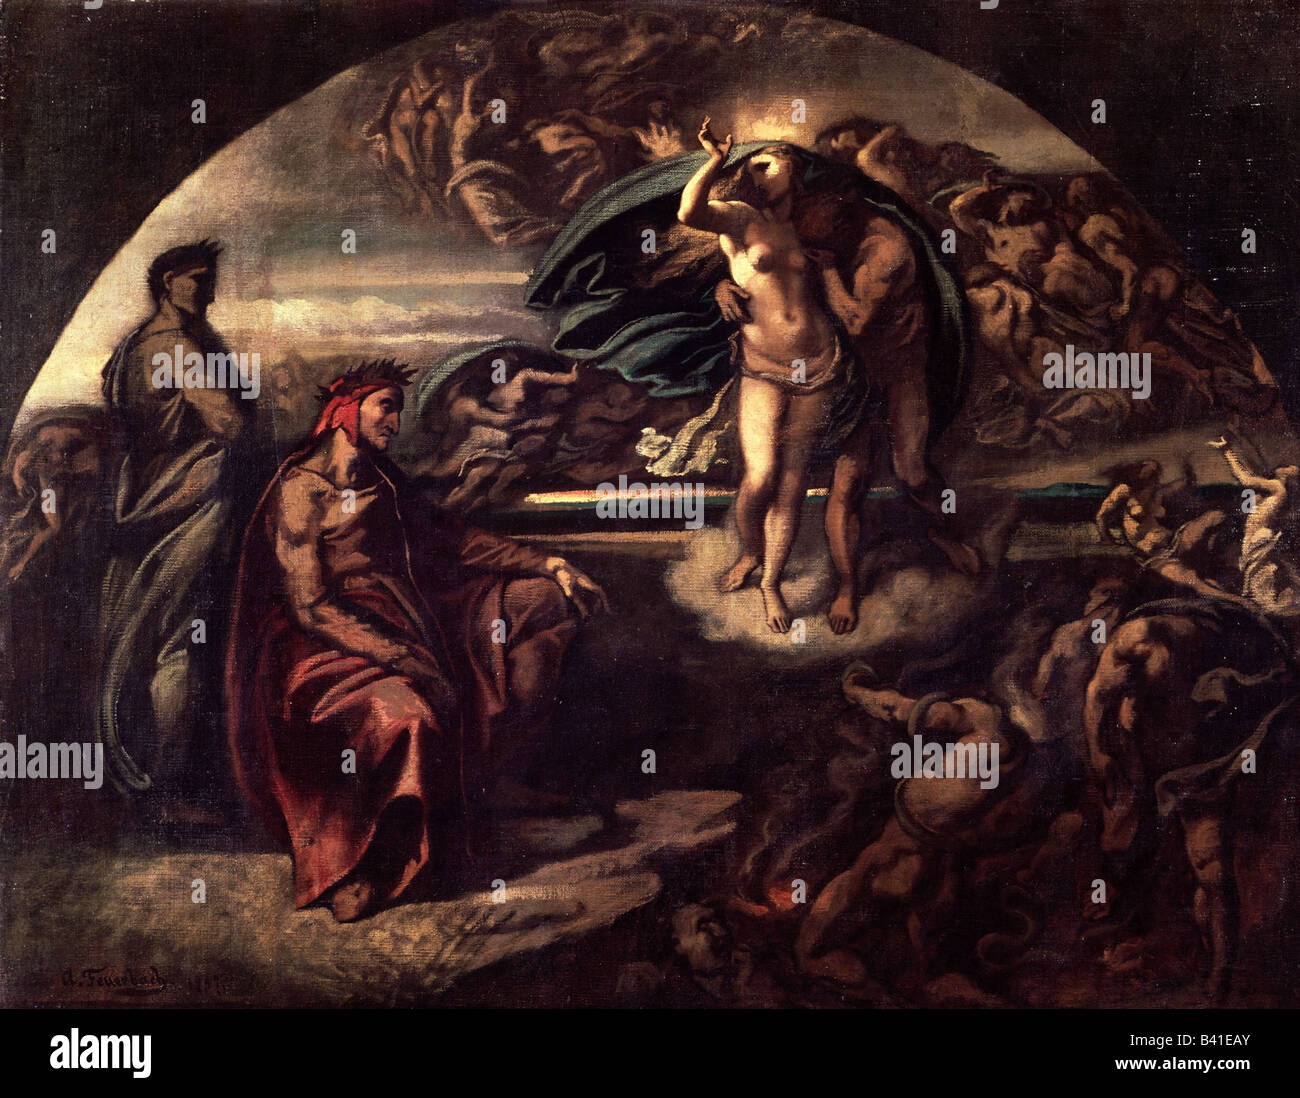 Dante, Alighieri, 1265 - 14.9.1321, Italian poet, works, 'Divine Comedy', in the underworld, painting, by Anselm Feuerbach (1829 - 1880), 1856, Schack Galery, Munich, Germany, Stock Photo